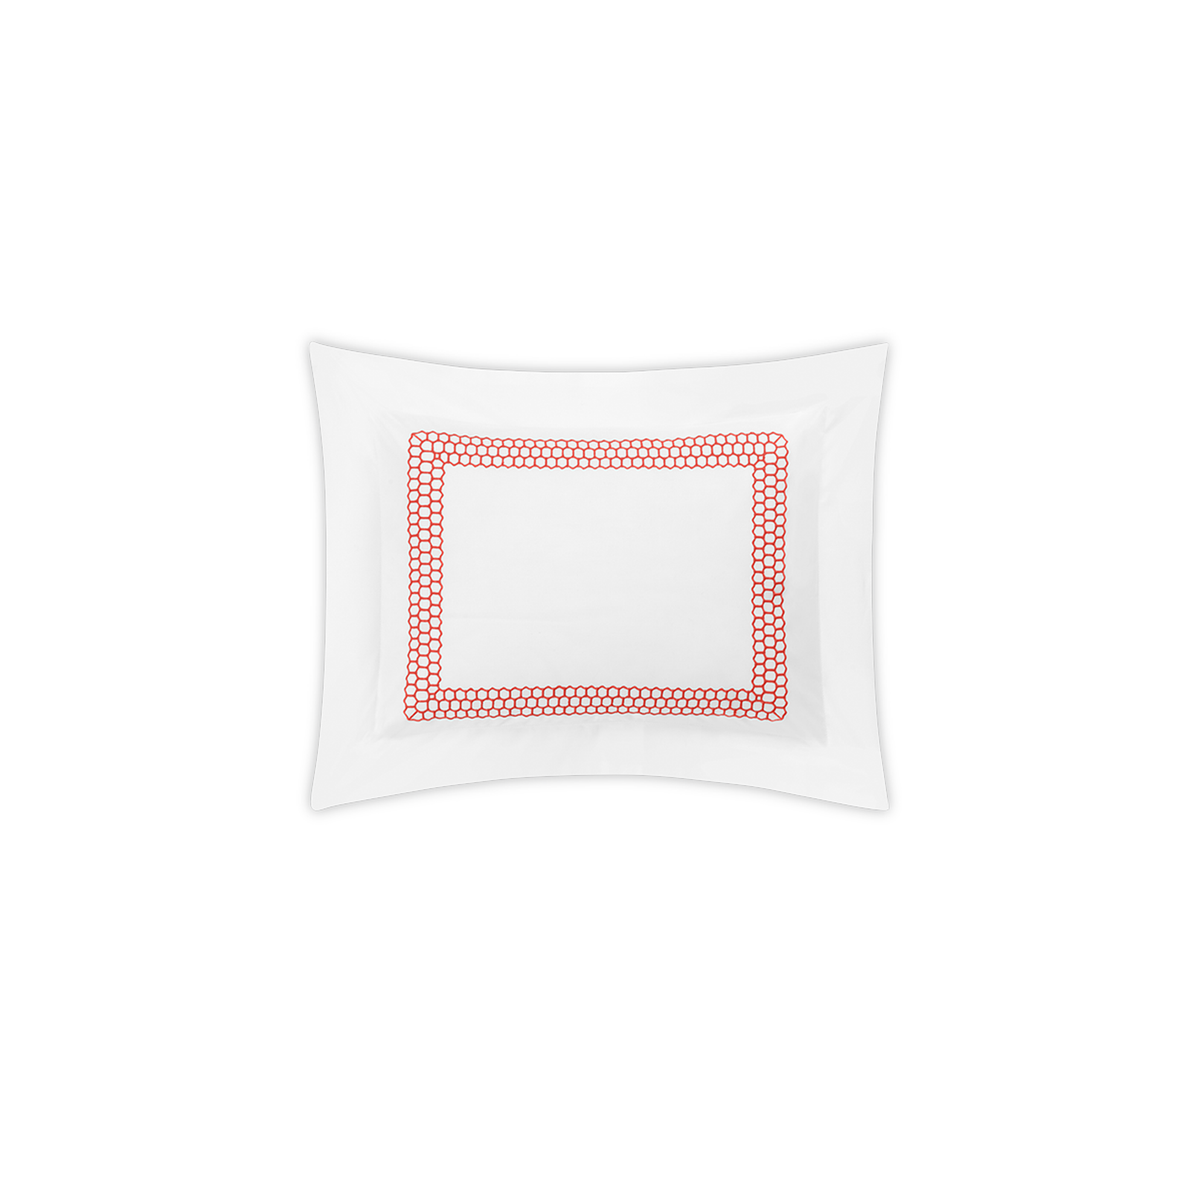 Clear Image of Matouk Liana Bedding Boudoir Sham in Coral Color